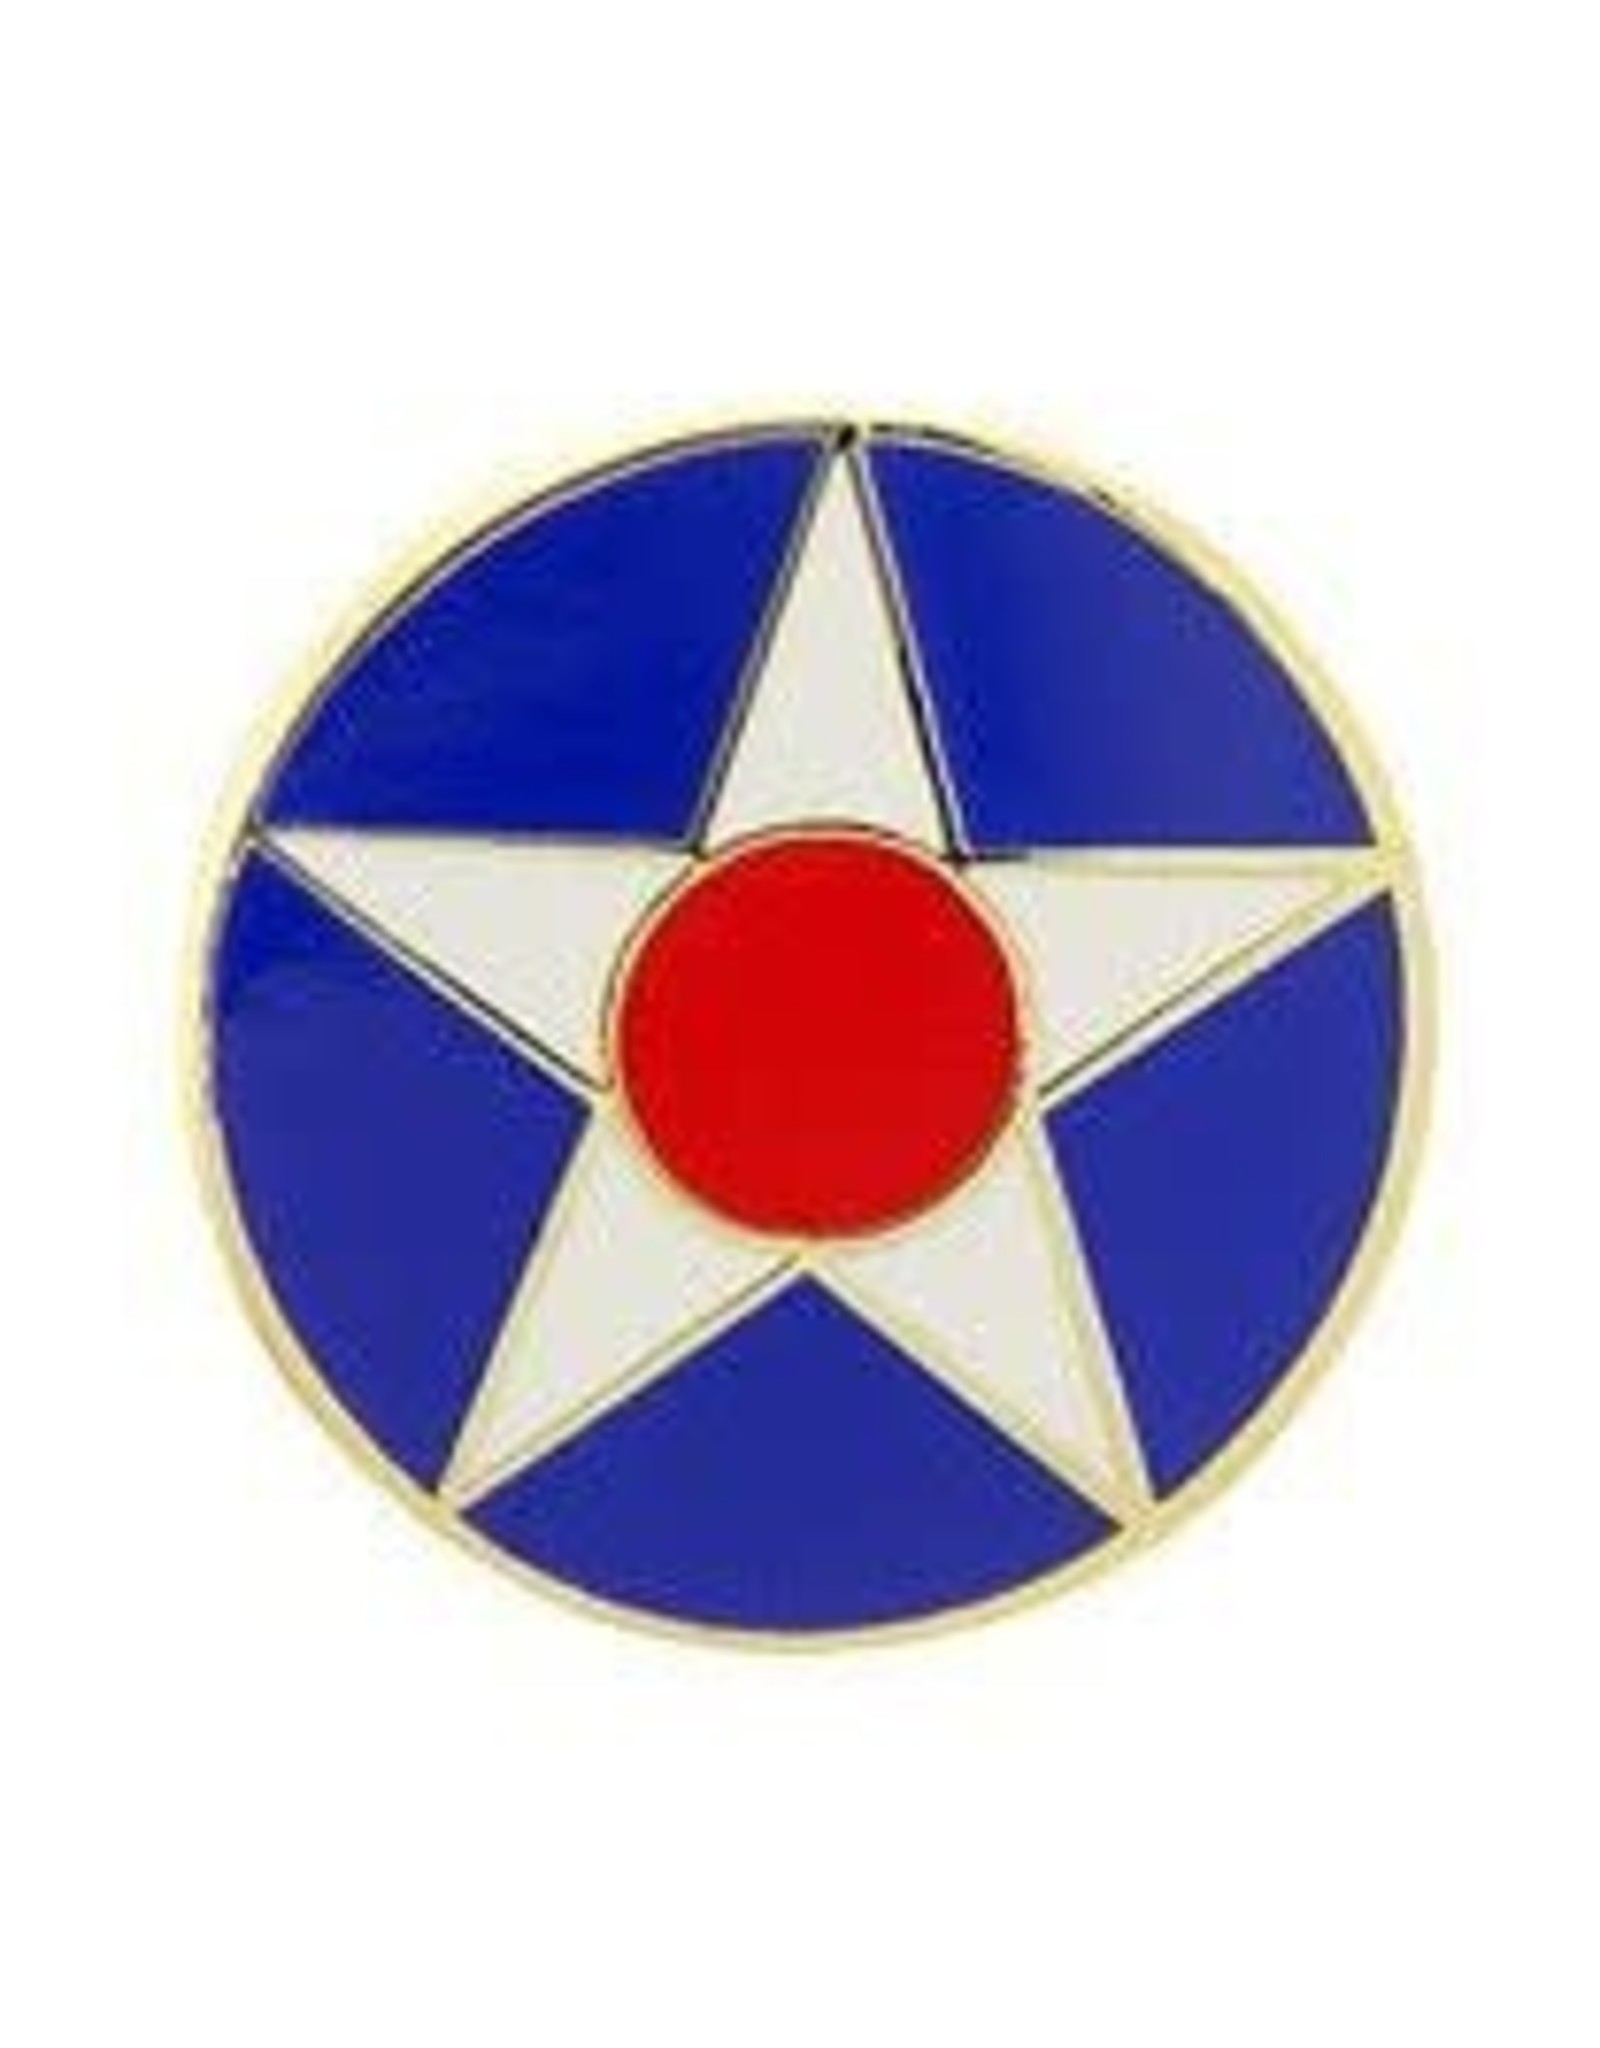 Pin - USAF Rondell AAF